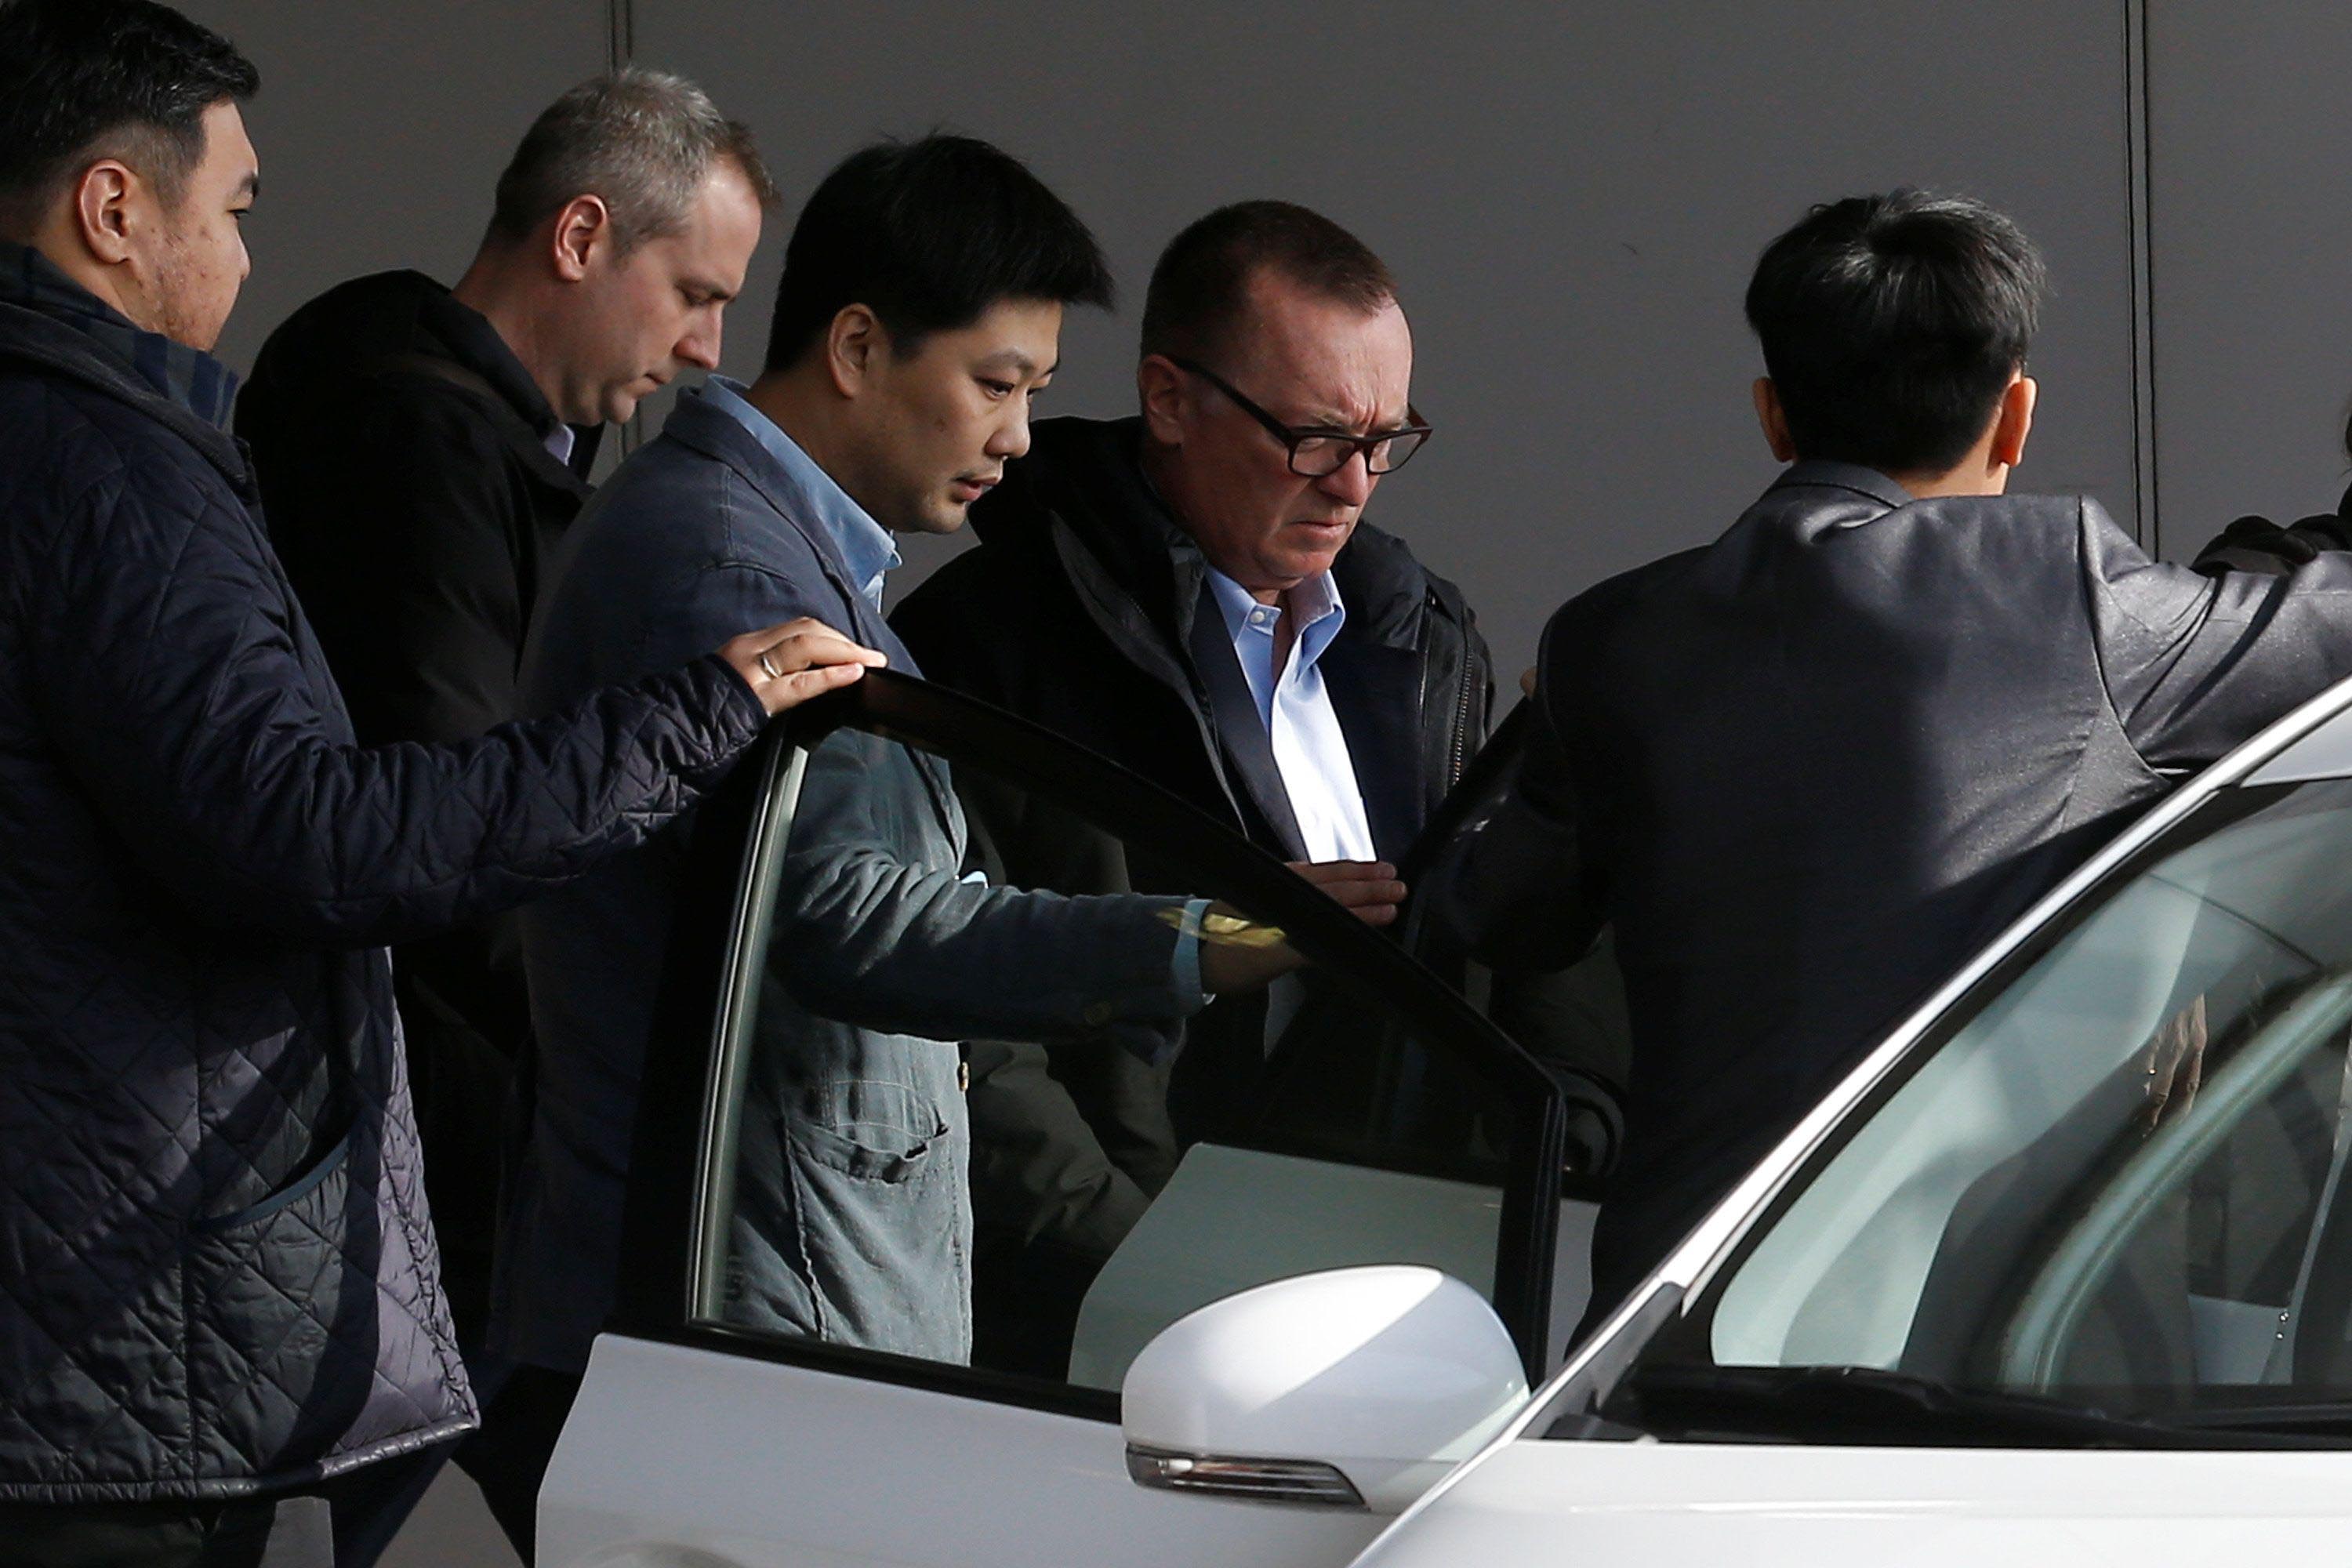 UPHILL TASK AHEAD: United Nations political affairs chief Jeffrey Feltman (2nd R) arrives at Beijing airport after his return from North Korea, Reuters/UNI